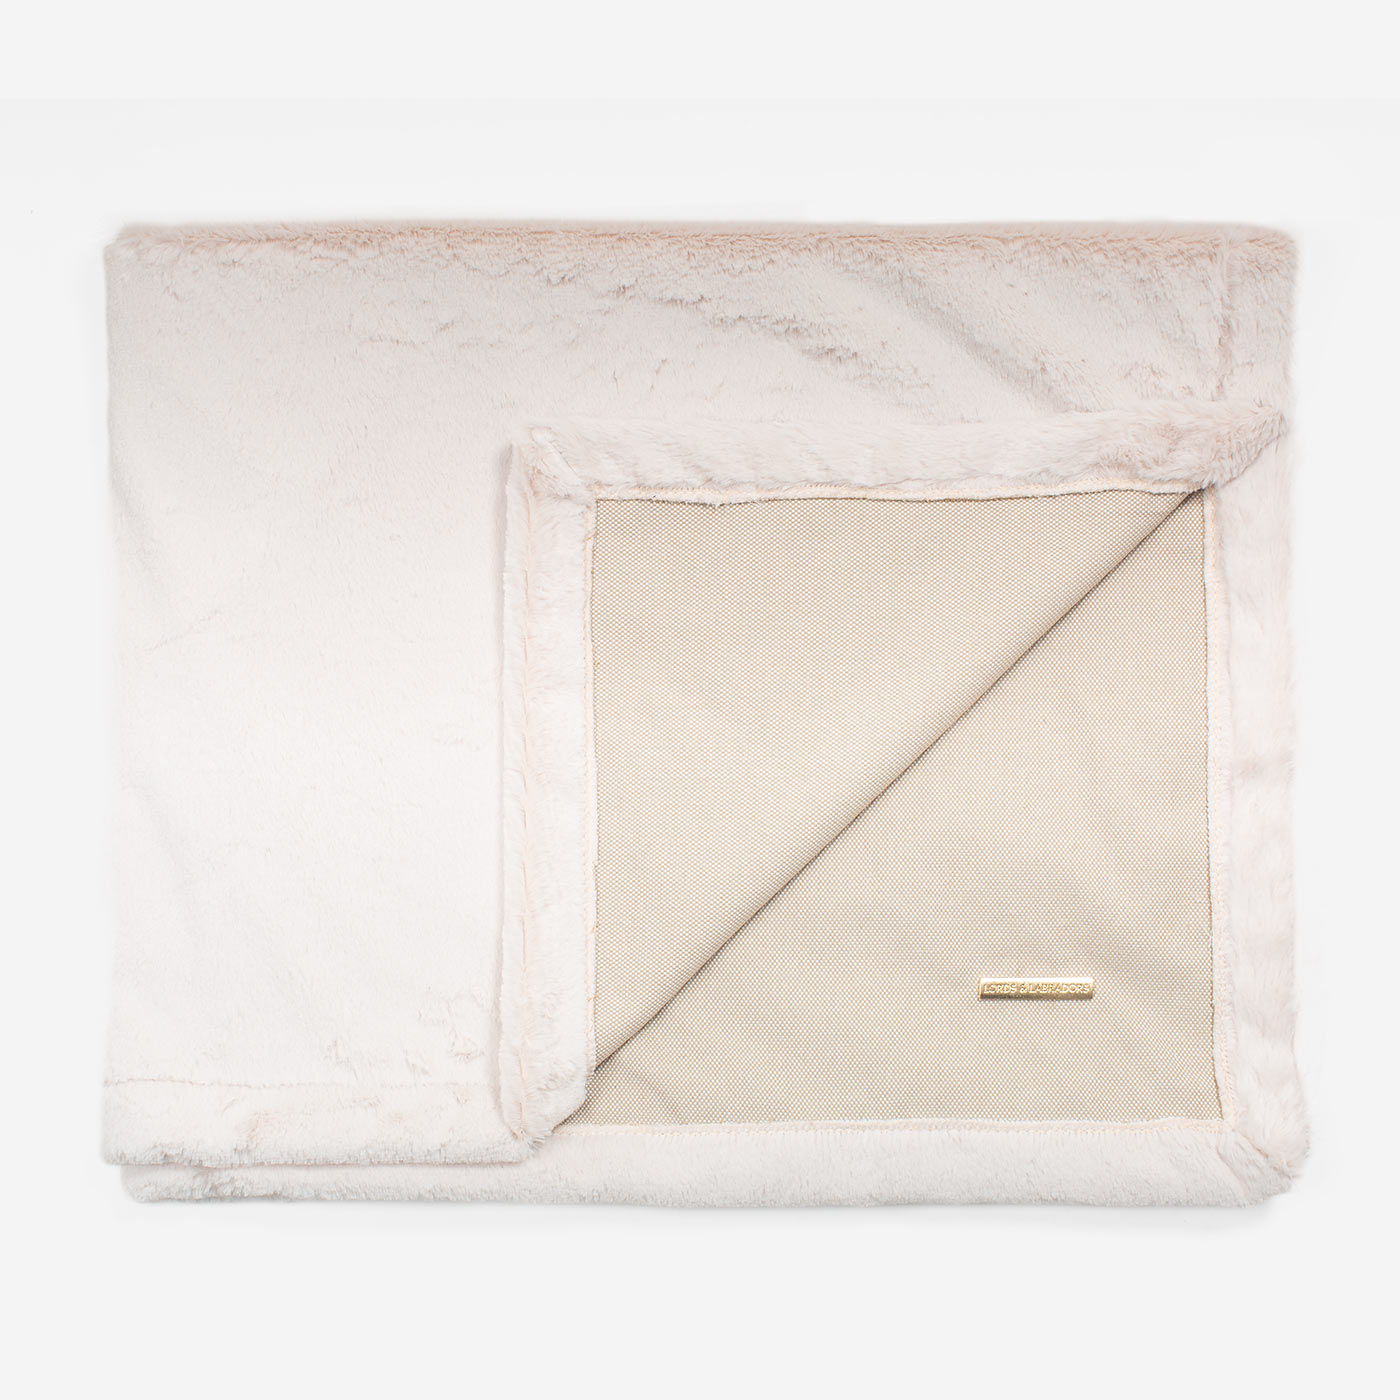 Present your furry friend with our luxuriously thick, plush blanket for your pet. Featuring a reverse side with hardwearing woven fabric handmade in Italy for the perfect high-quality pet blanket! Essentials Twill Blanket In Linen, Available now at Lords & Labradors US